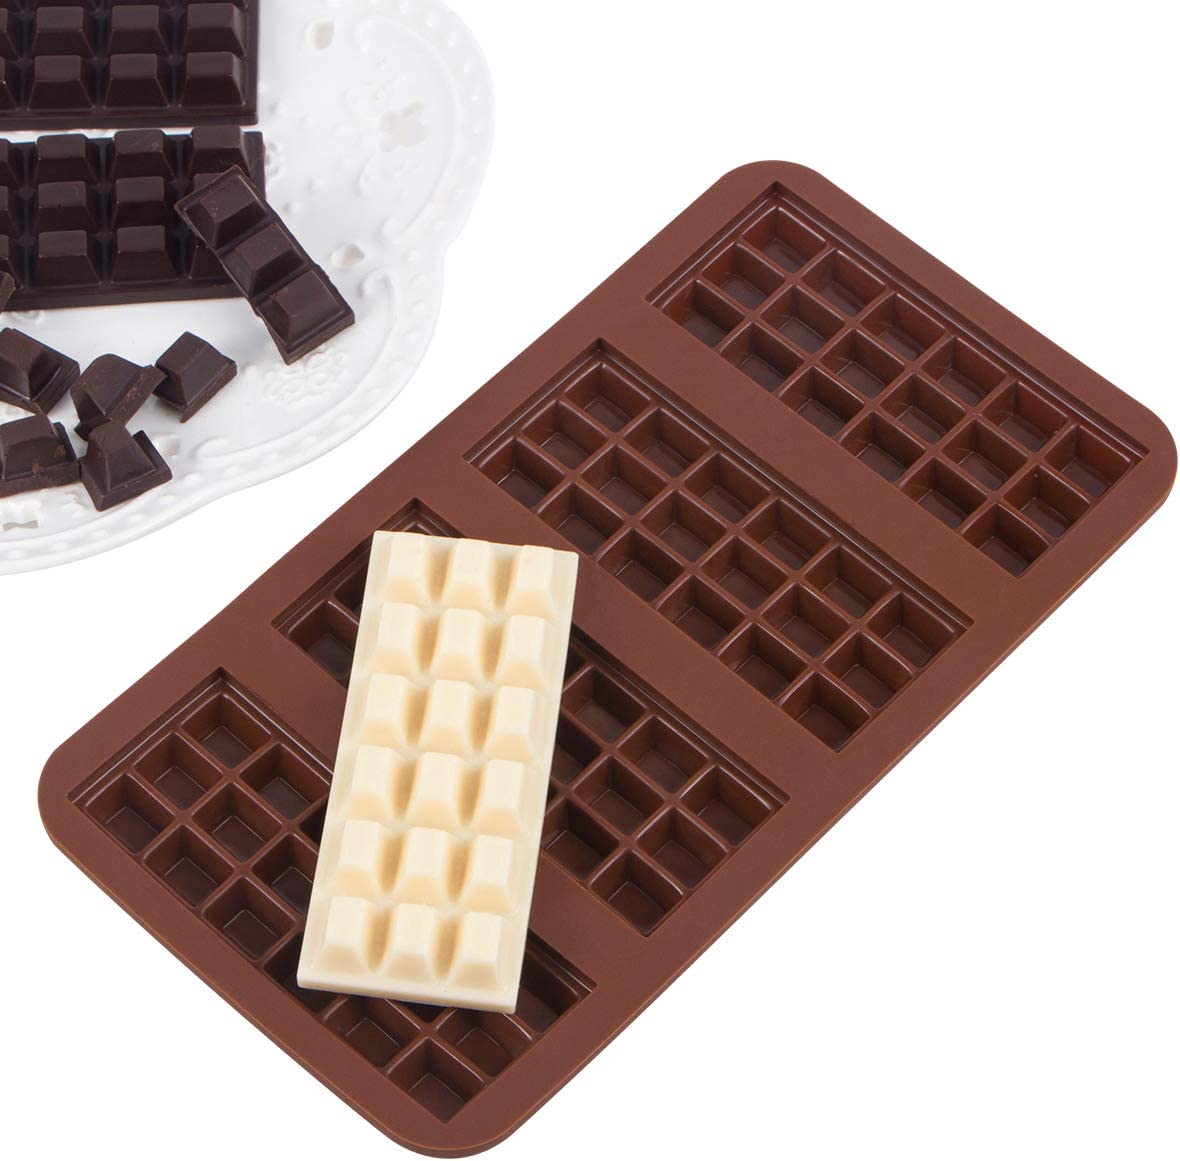 Webake 1 Ounce chocolate protein energy bar silicone break-apart food grade easy release candy molds,Pack of 2